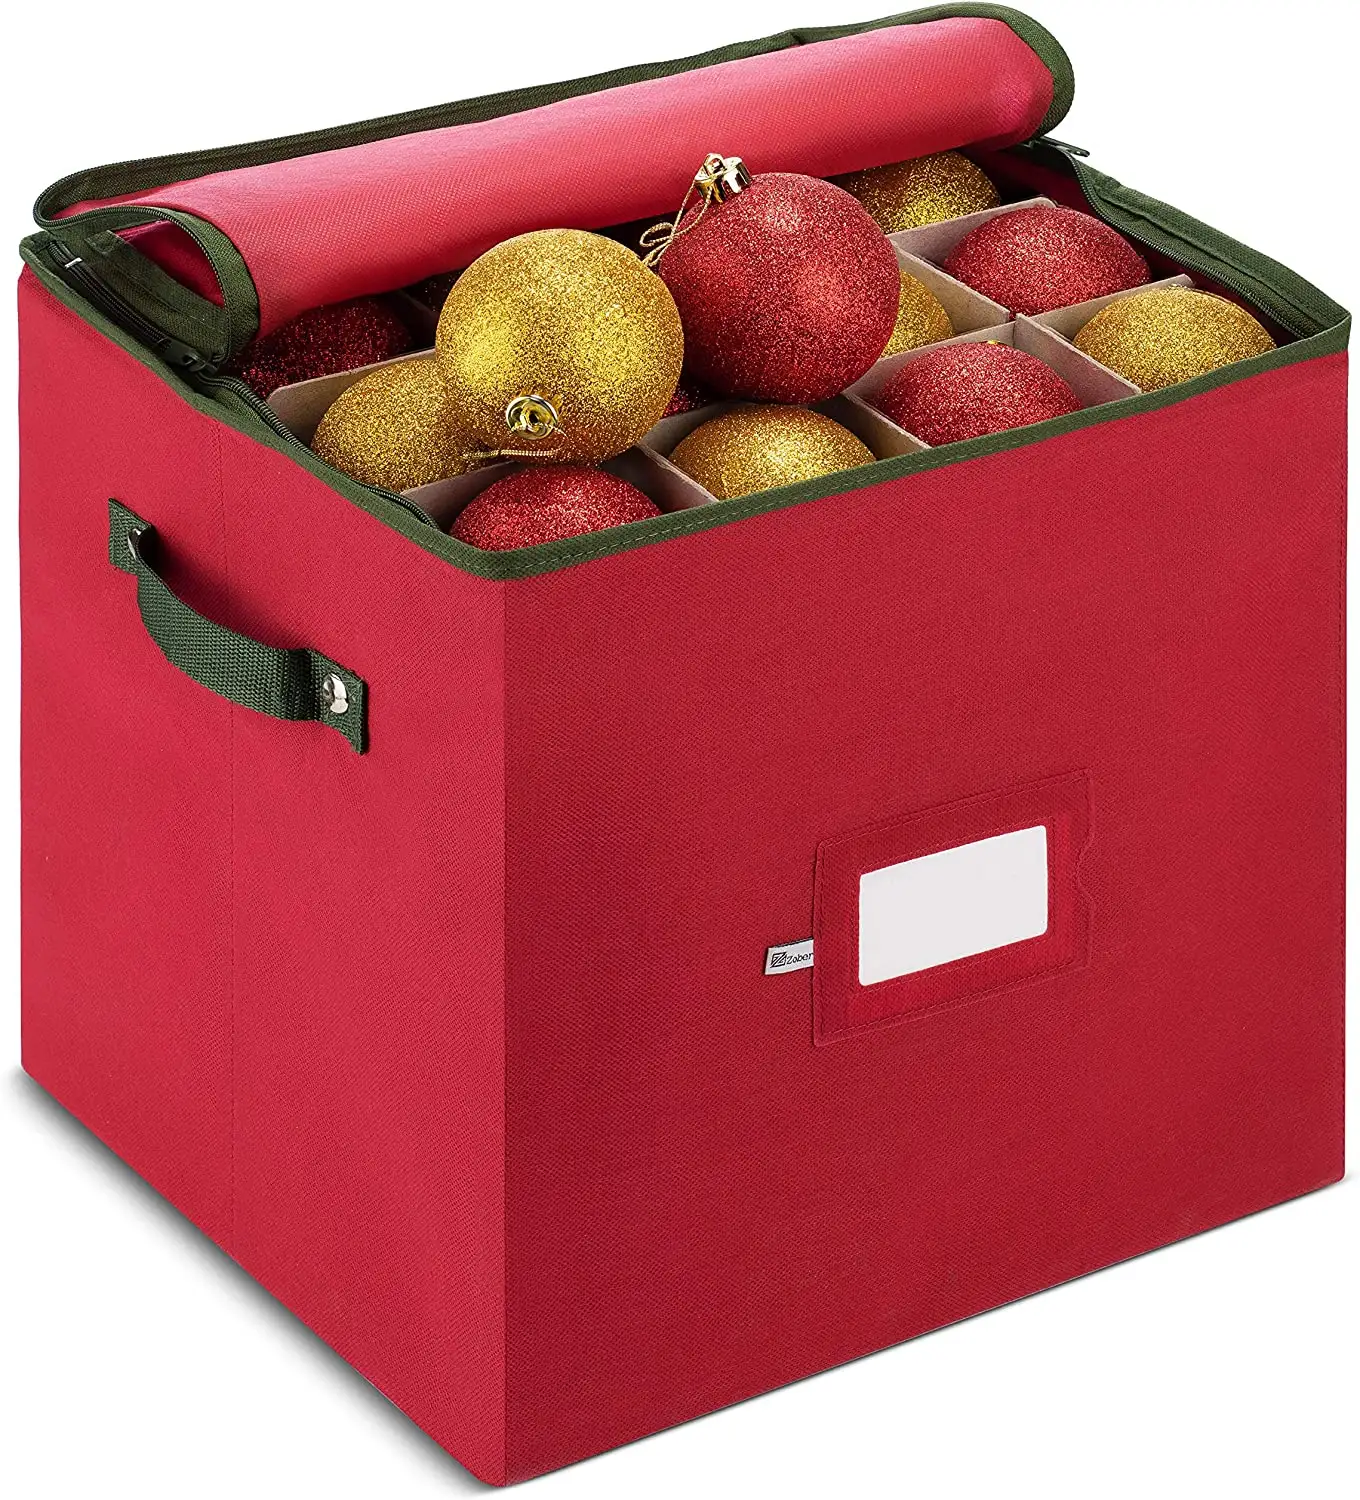 Hot sell Holiday foldable Christmas Ornament Storage organizers Storage Used for storing things